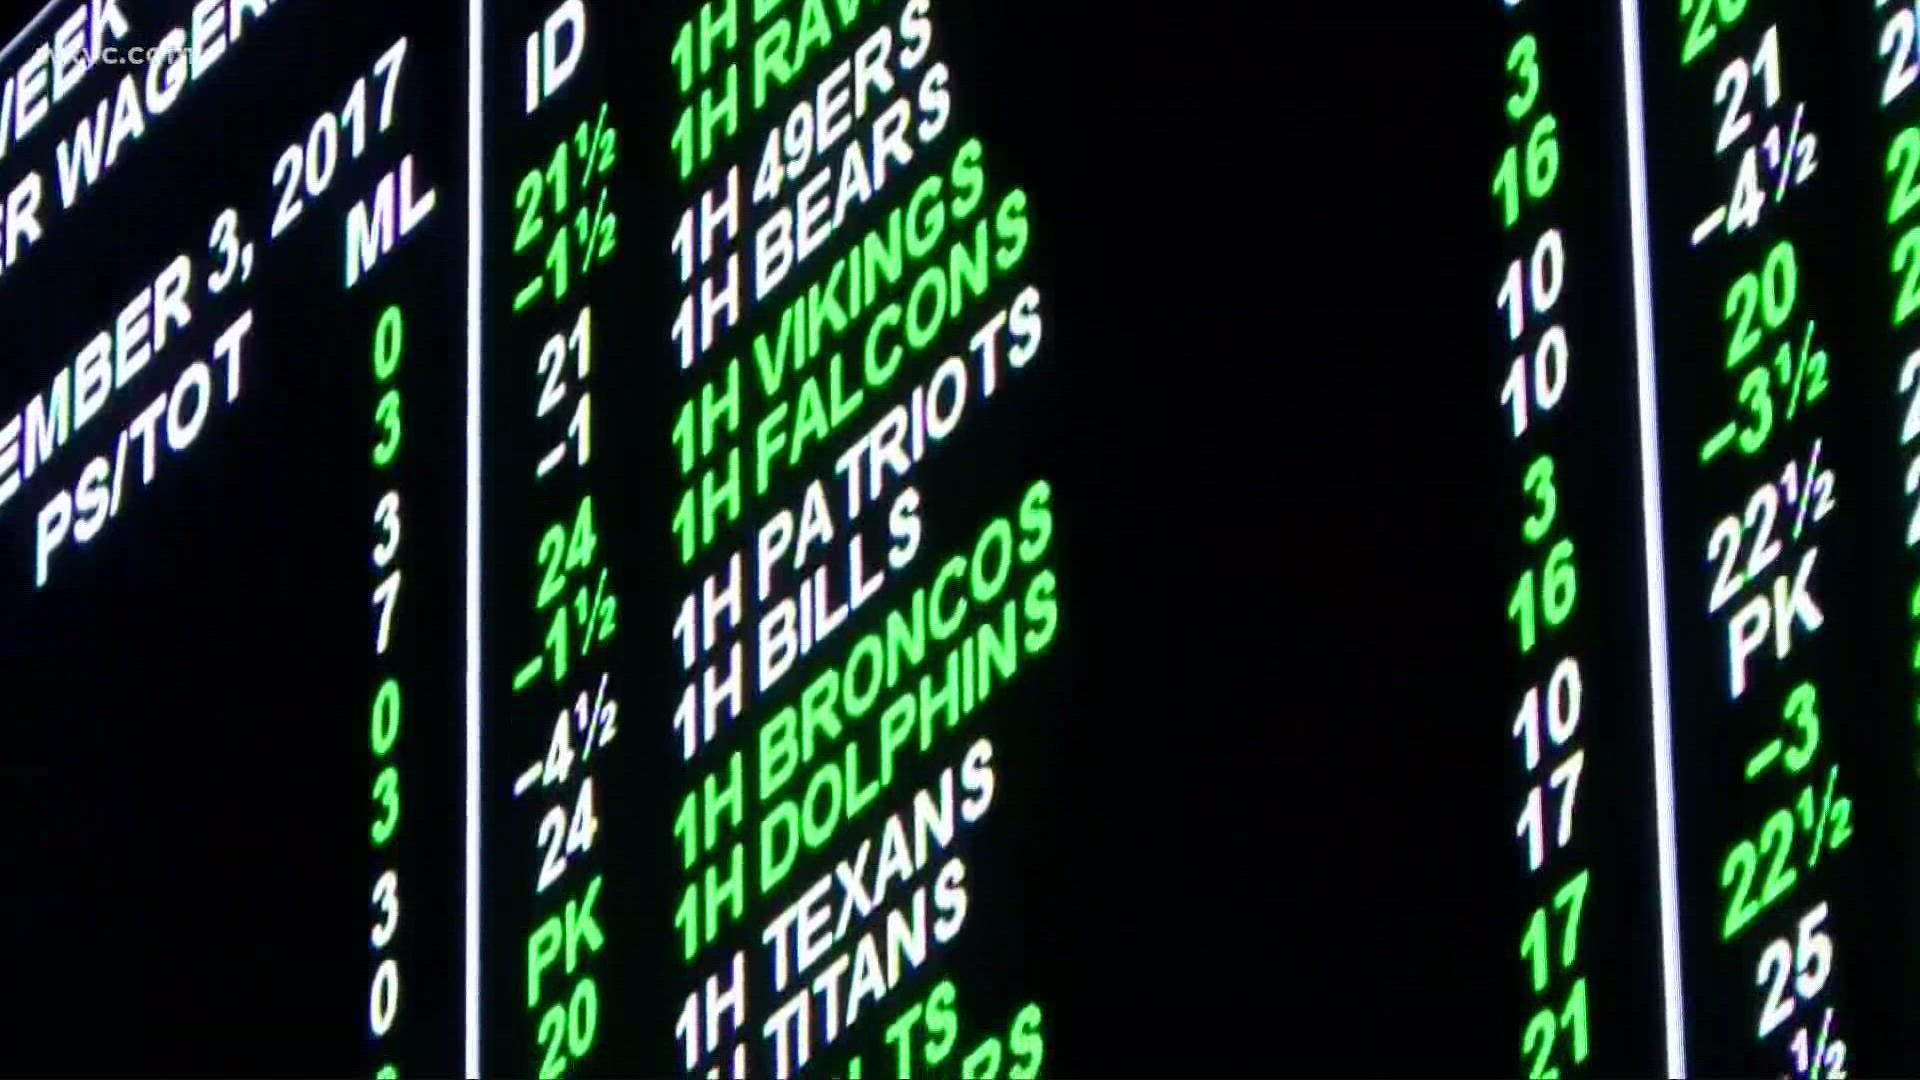 The Ohio House of Representatives and Senate have passed a bill that would legalize sports betting in the state.